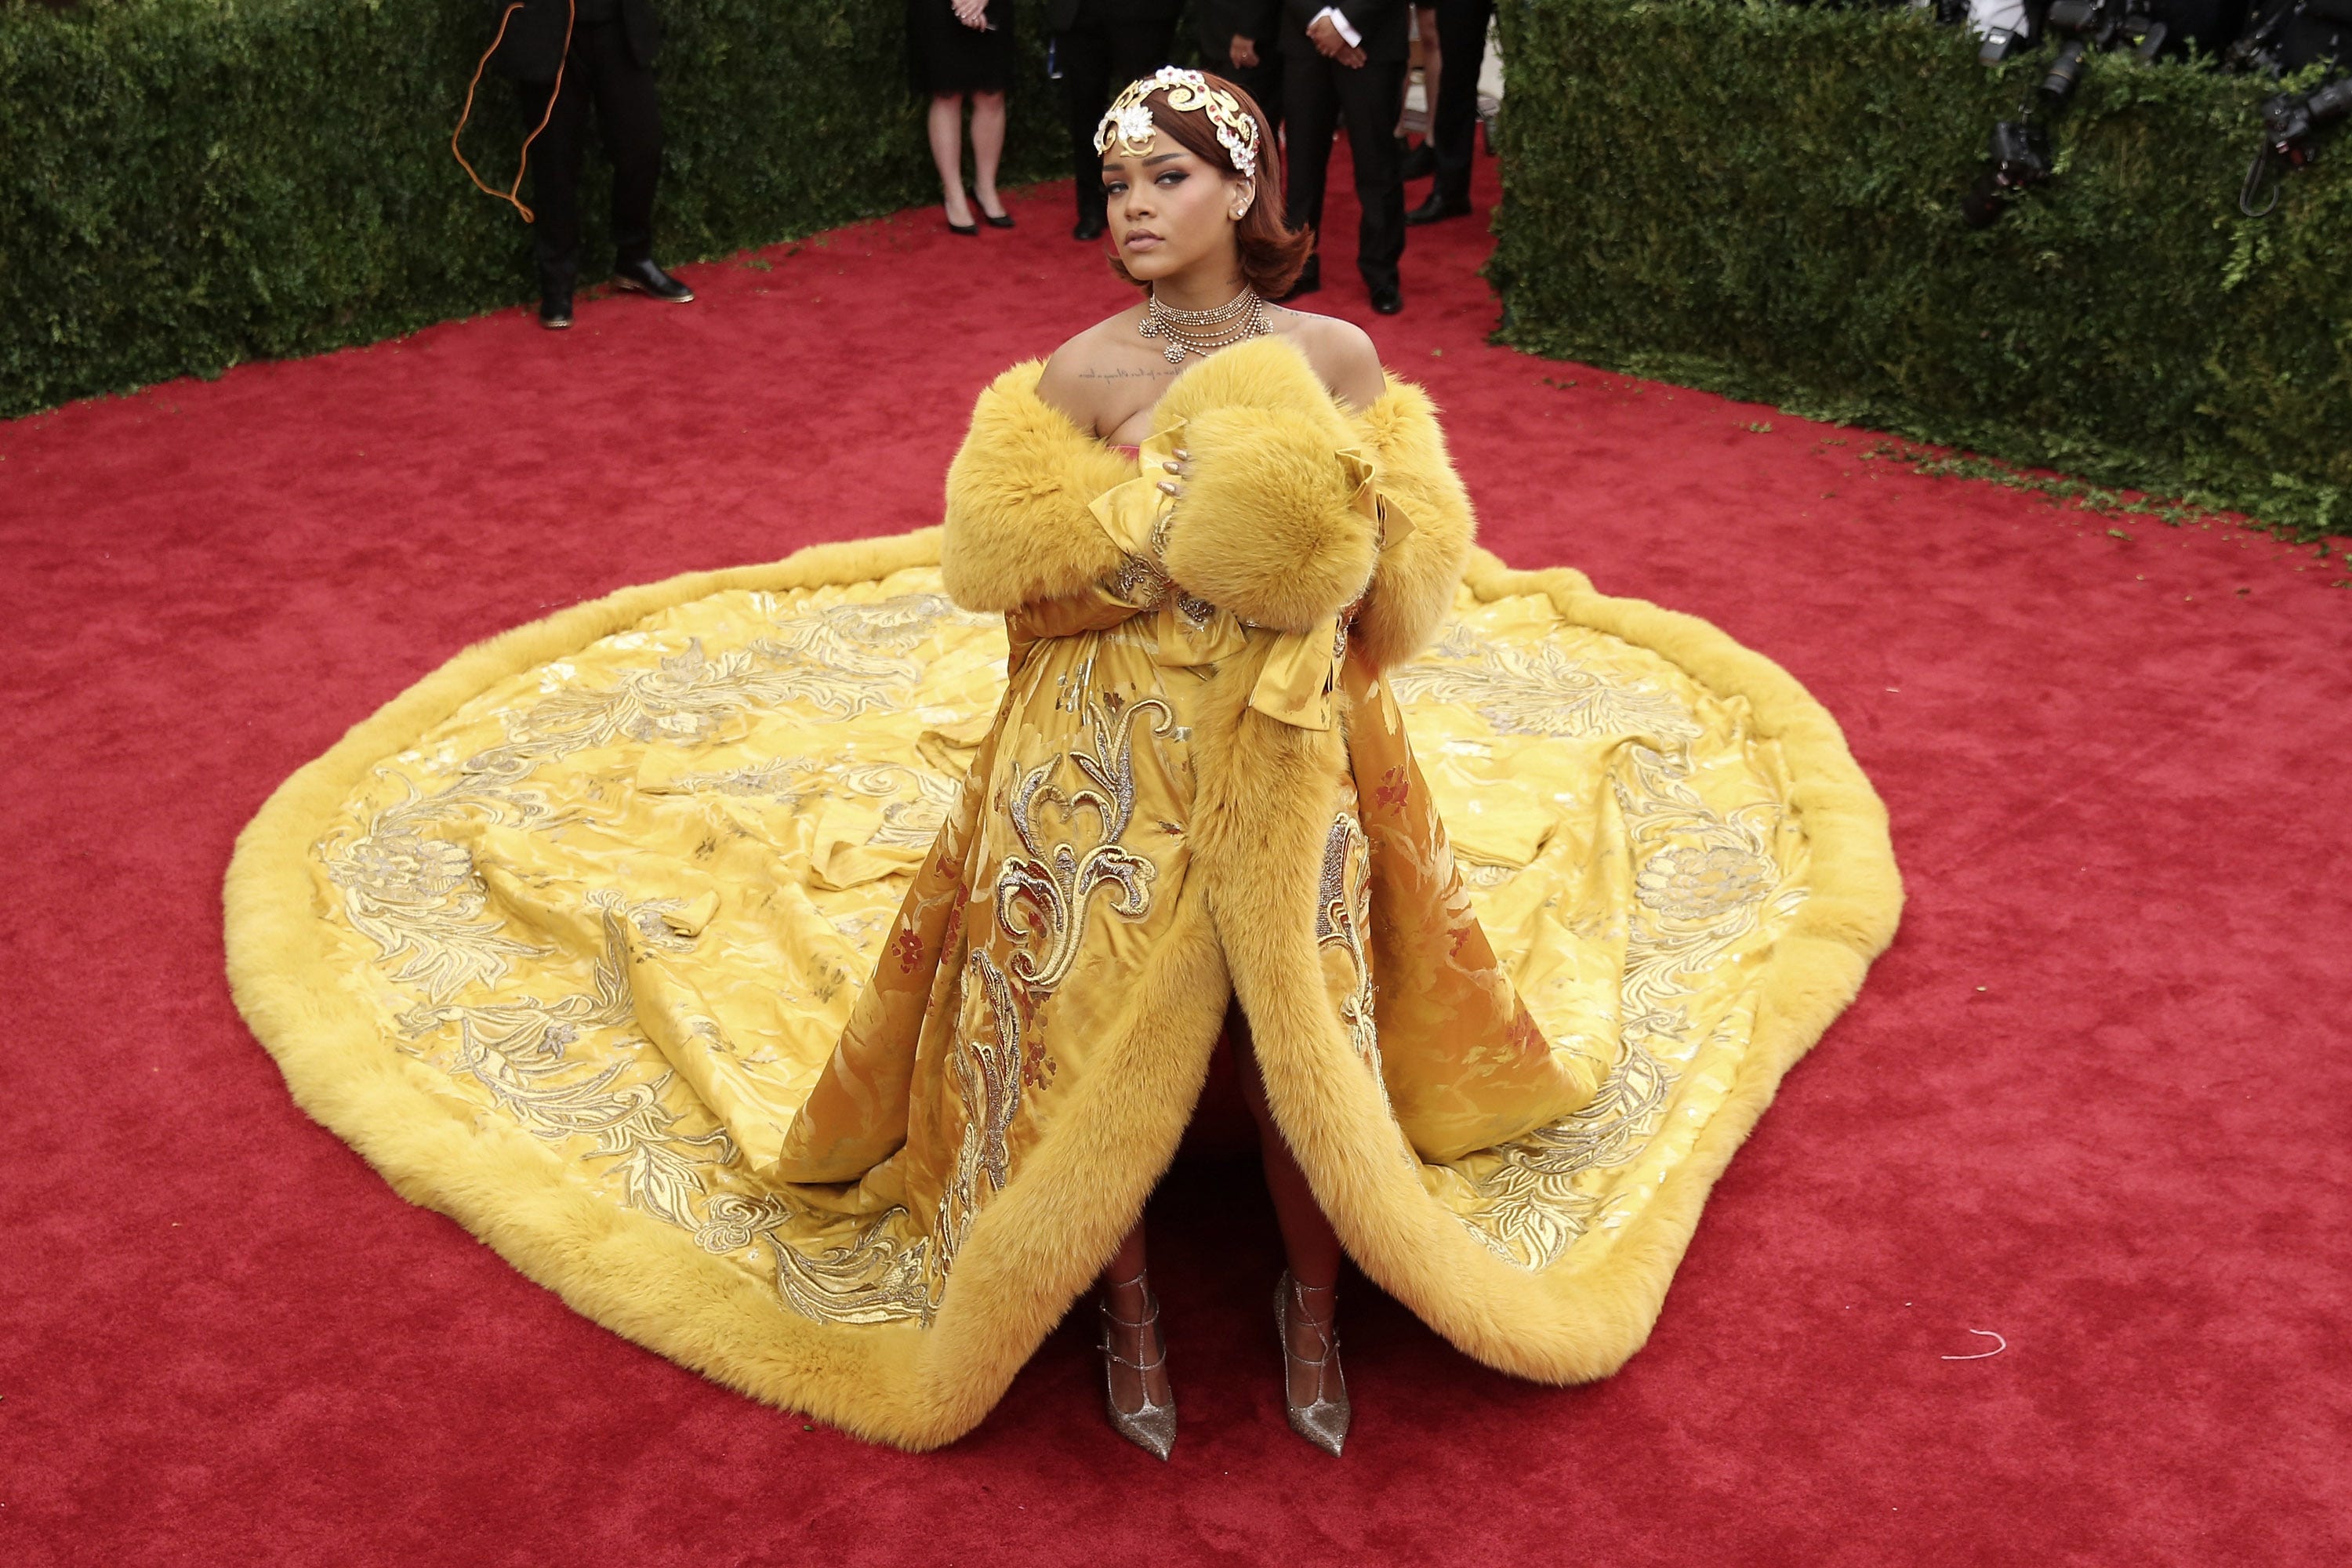 <p><span>As the biggest night of the year for celebrity fashion, it's hard to stand out from the pack when walking the famous Met steps. But stars like </span><a href="https://www.businessinsider.com/rihanna-met-gala-fashion-2018-5"><span>Rihanna</span></a><span>, </span><a href="https://www.businessinsider.com/kim-kardashian-met-gala-looks-ranked"><span>Kim Kardashian</span></a><span>, and </span><a href="https://www.businessinsider.com/blake-lively-met-gala-looks-ranked"><span>Blake Lively</span></a><span> have cemented themselves as Met Gala royalty.</span></p><p><span>It's unclear whether all of those Met Gala legends will attend the 2024 event — though Rihanna is expected to make an appearance — but co-hosts </span><a href="https://www.businessinsider.com/zendaya-met-gala-looks-ranked"><span>Zendaya</span></a><span> and </span><a href="https://www.businessinsider.com/jennifer-lopez-met-gala-outfits-ranked-2024-5"><span>Jennifer Lopez</span></a><span> are known to make a splash with their looks, too.</span></p>